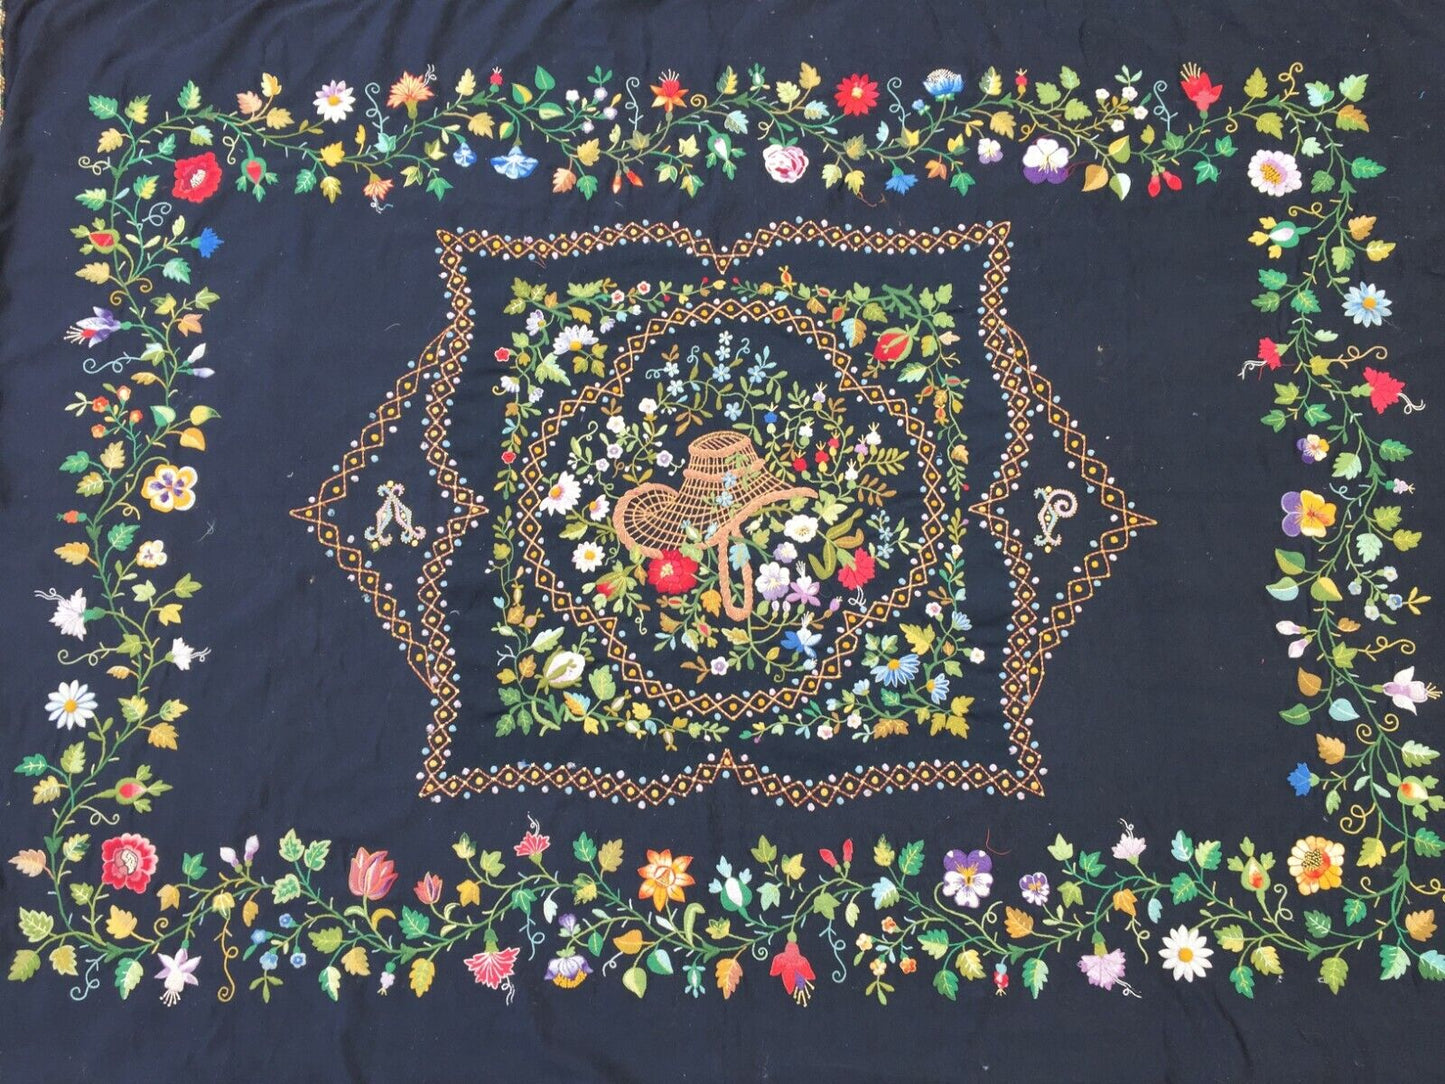 Close-up of the detailed needlepoint depiction at the rug's centerpiece